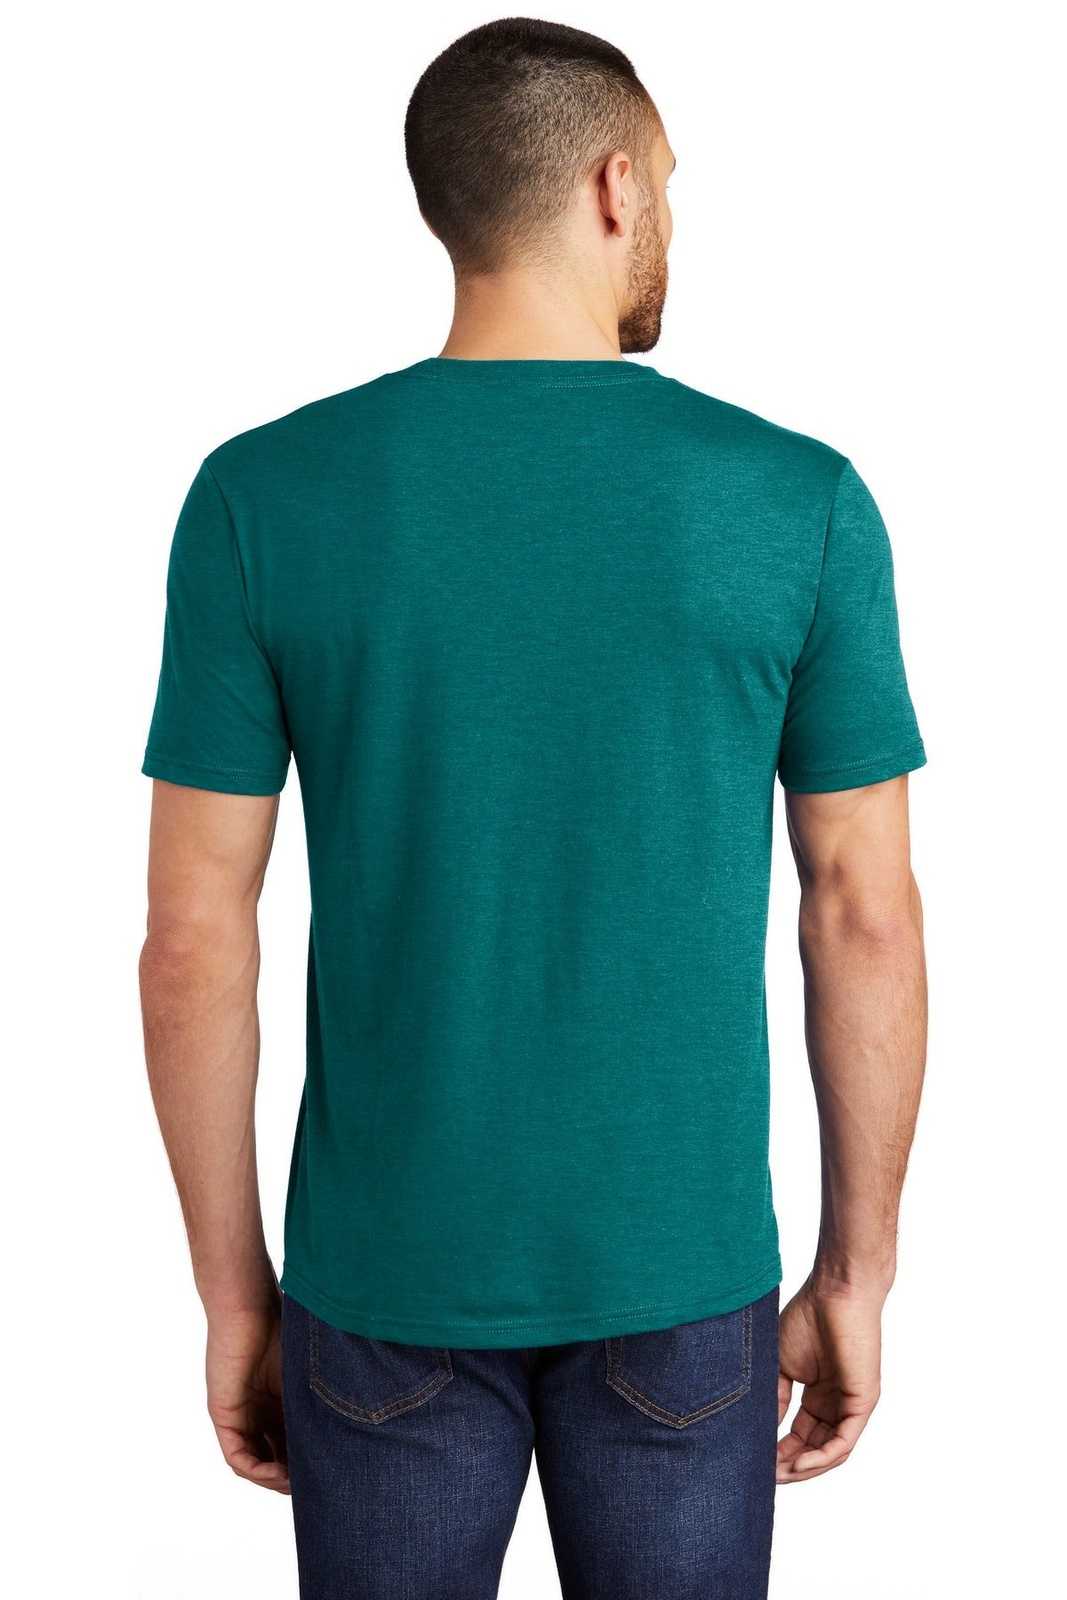 District DM130 Perfect Tri Tee - Heathered Teal - HIT a Double - 1